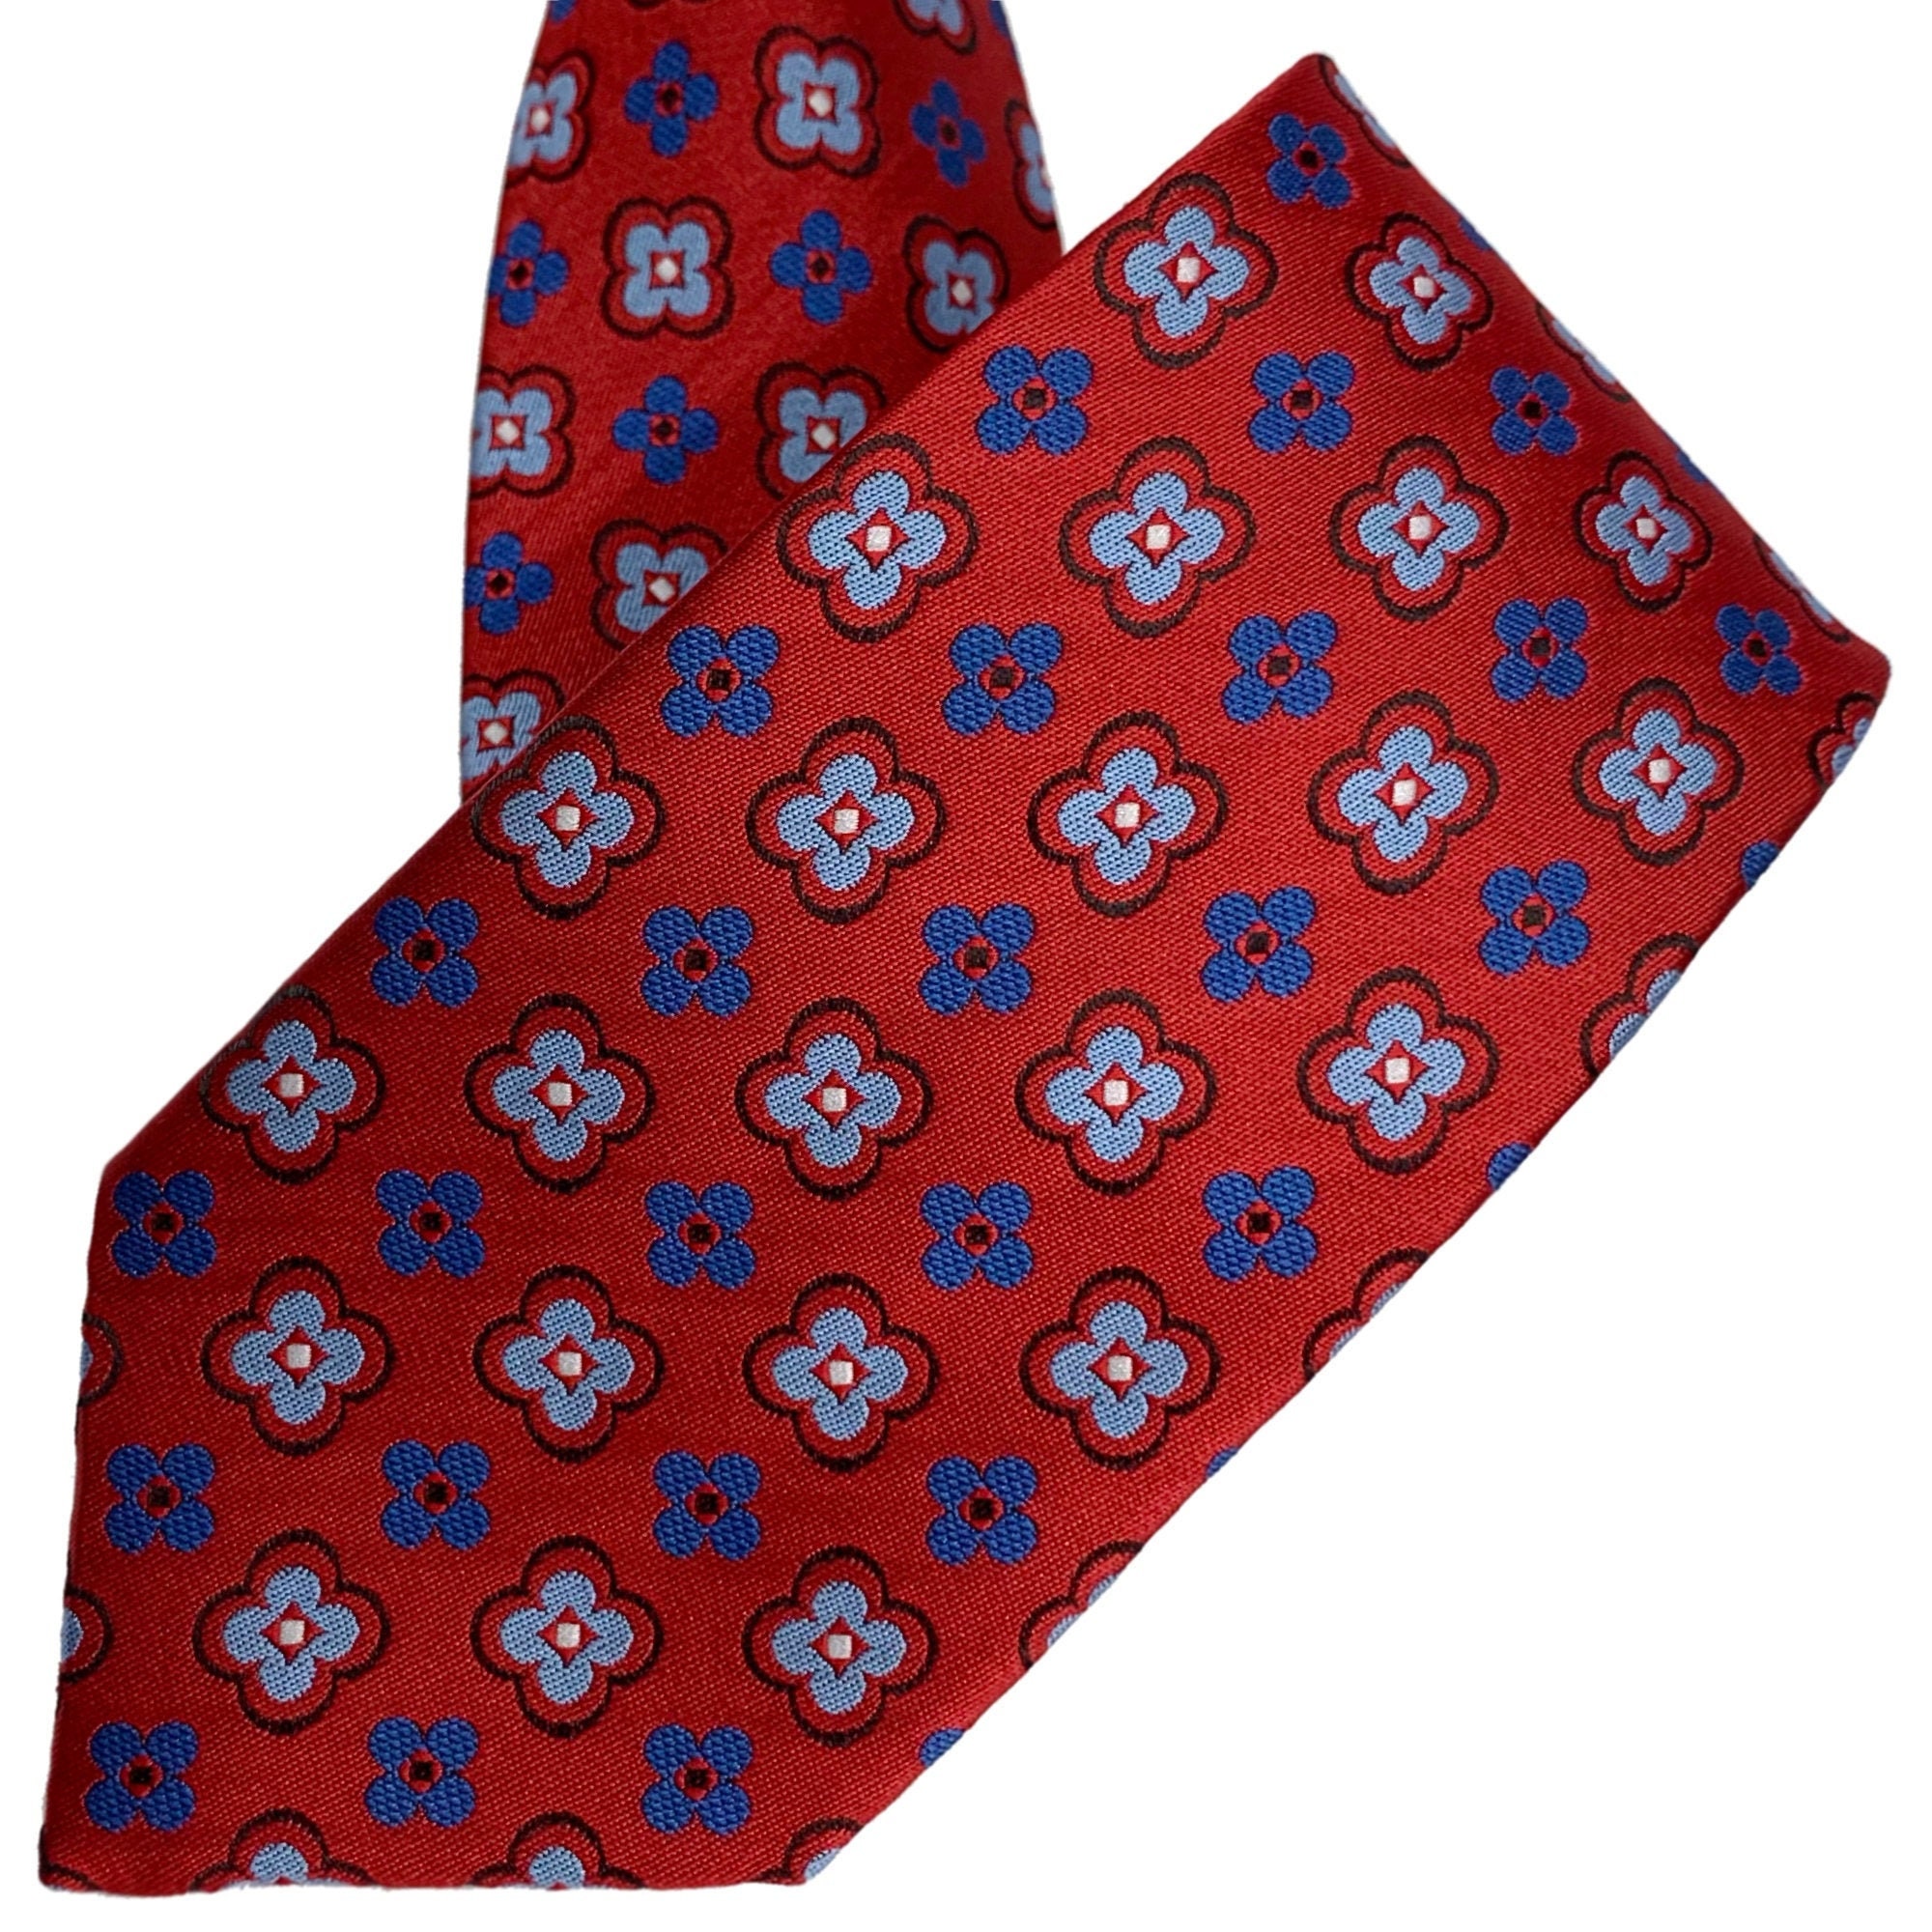 White Dotted Tie With Blue Sax Blue and Black Flowers on Red - Etsy